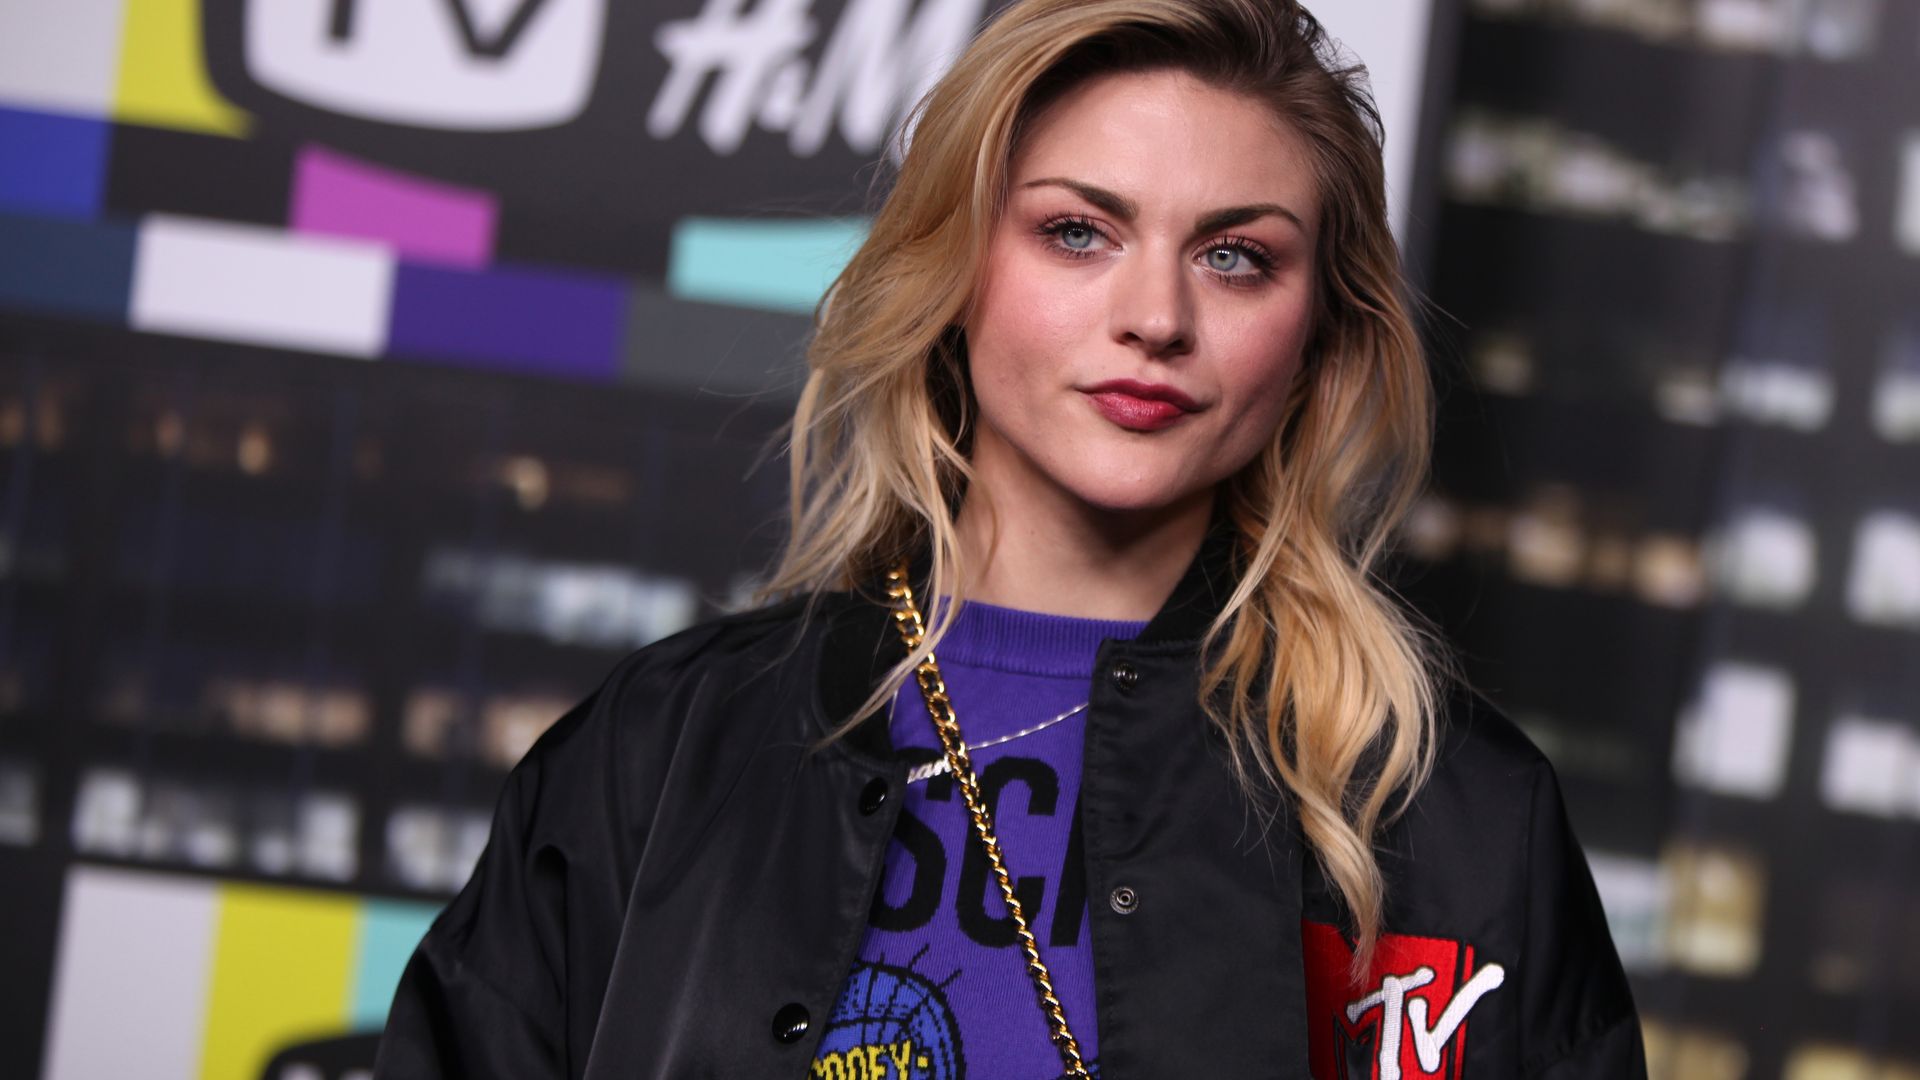 Frances Bean Cobain on red carpet for Moschino x H&M